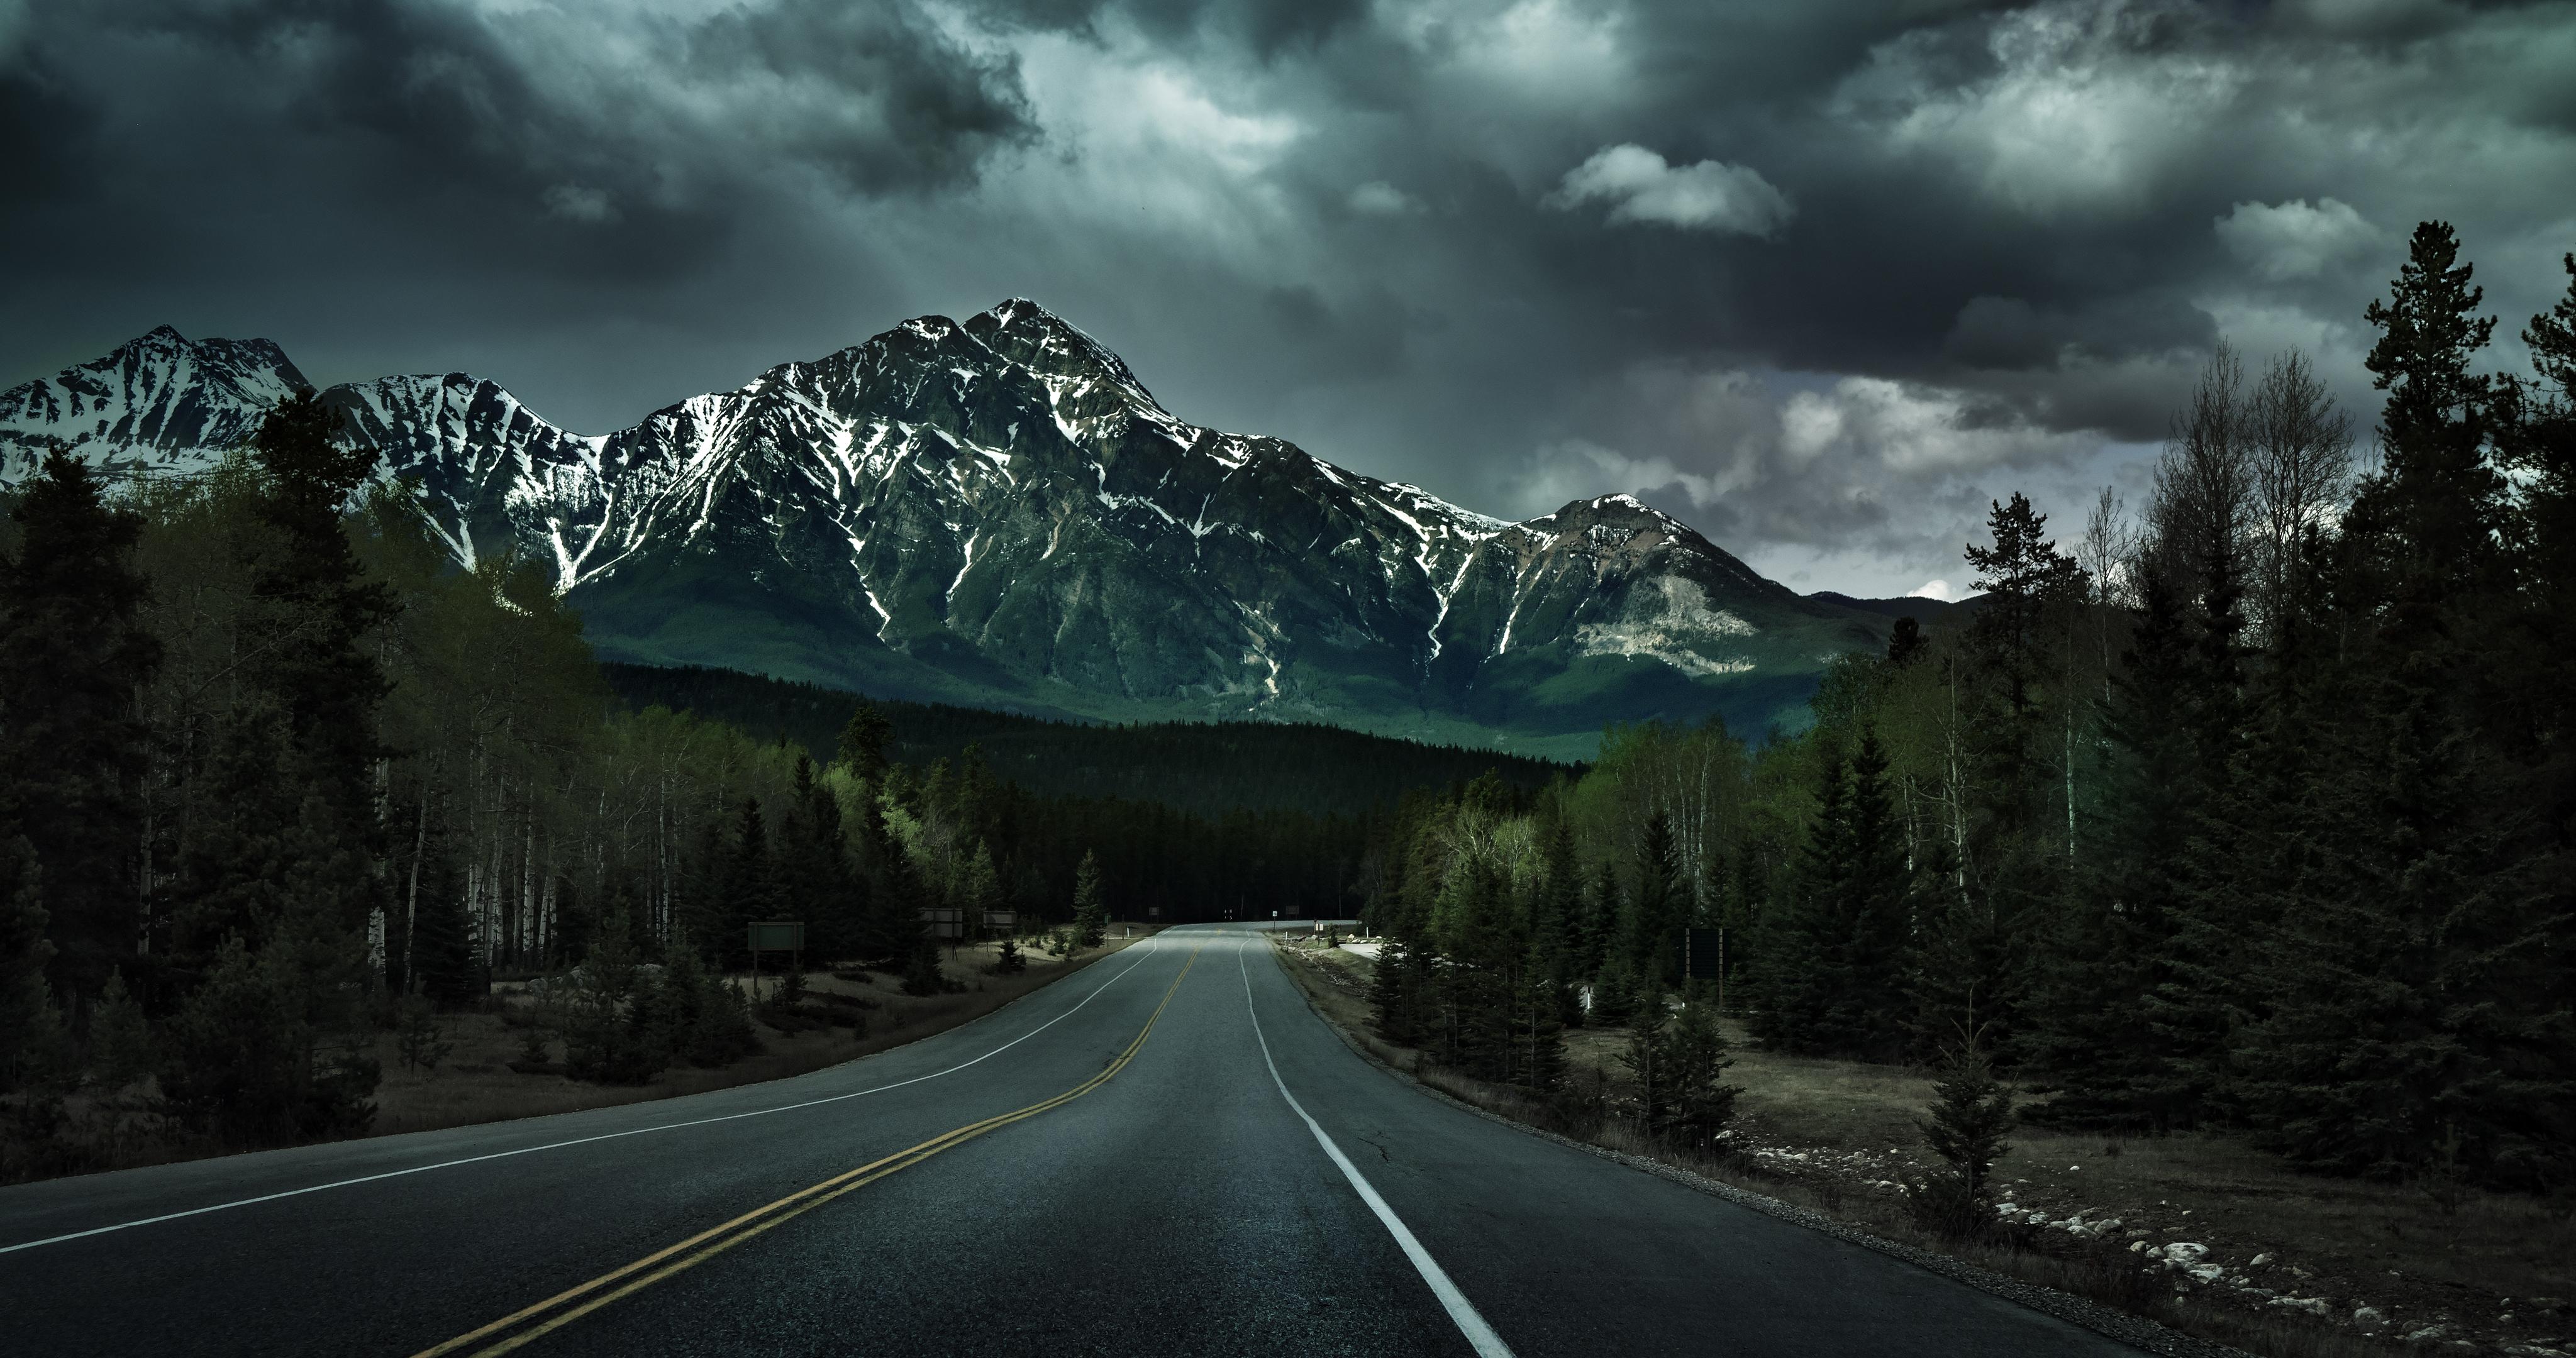 4096 x 2160 · jpeg - 4K Road Wallpapers High Quality | Download Free